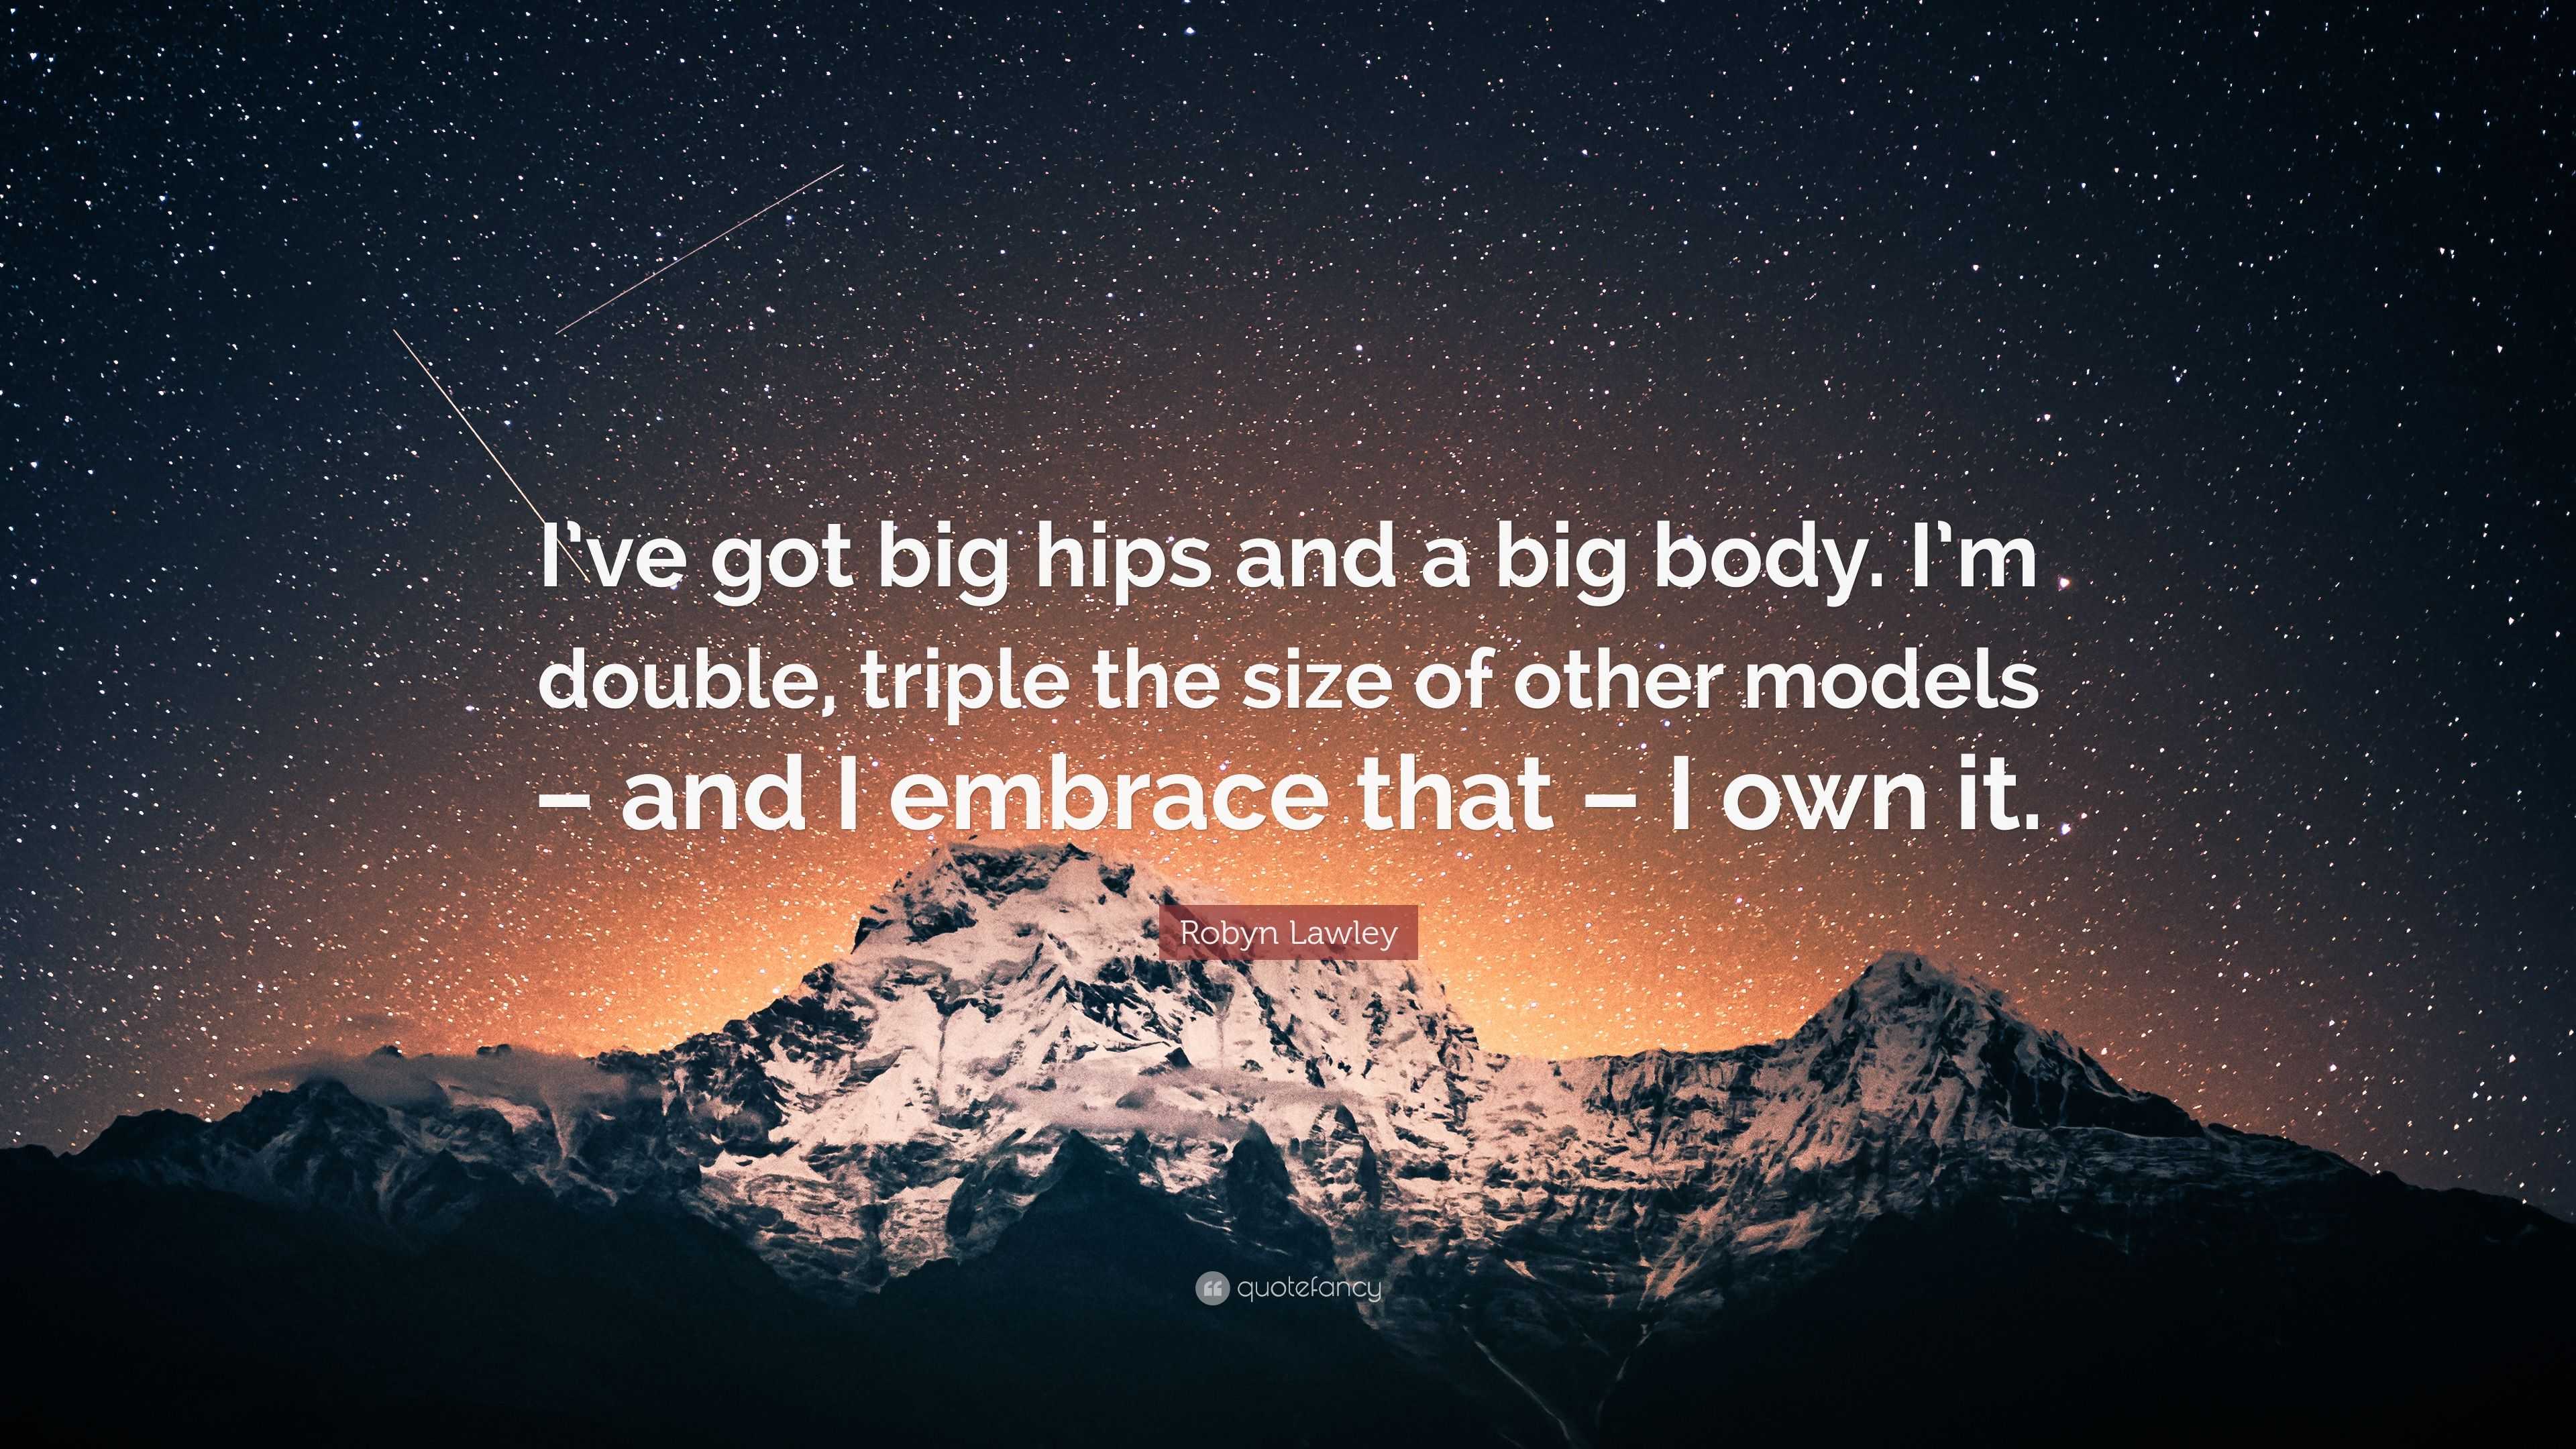 Robyn Lawley Quote: “I've got big hips and a big body. I'm double, triple